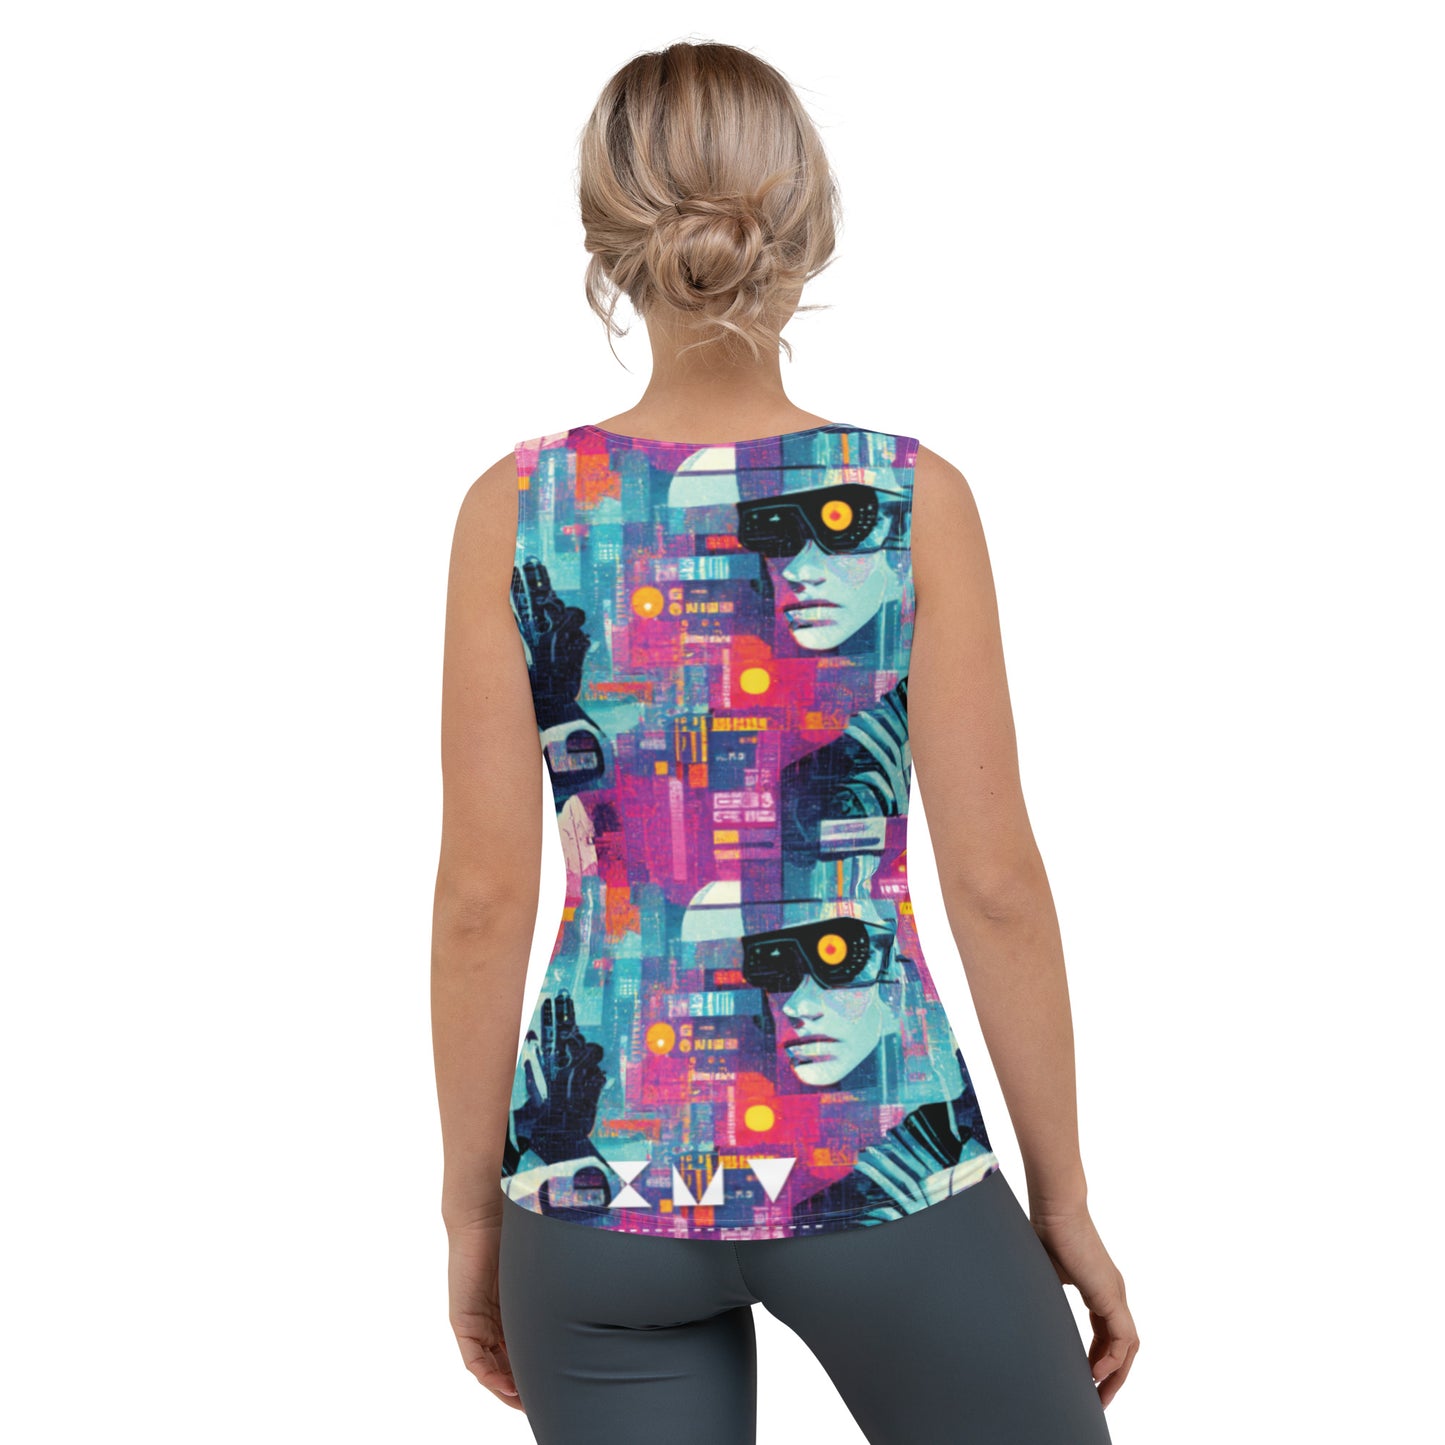 Cyber Girl Collage v1 Tank Top